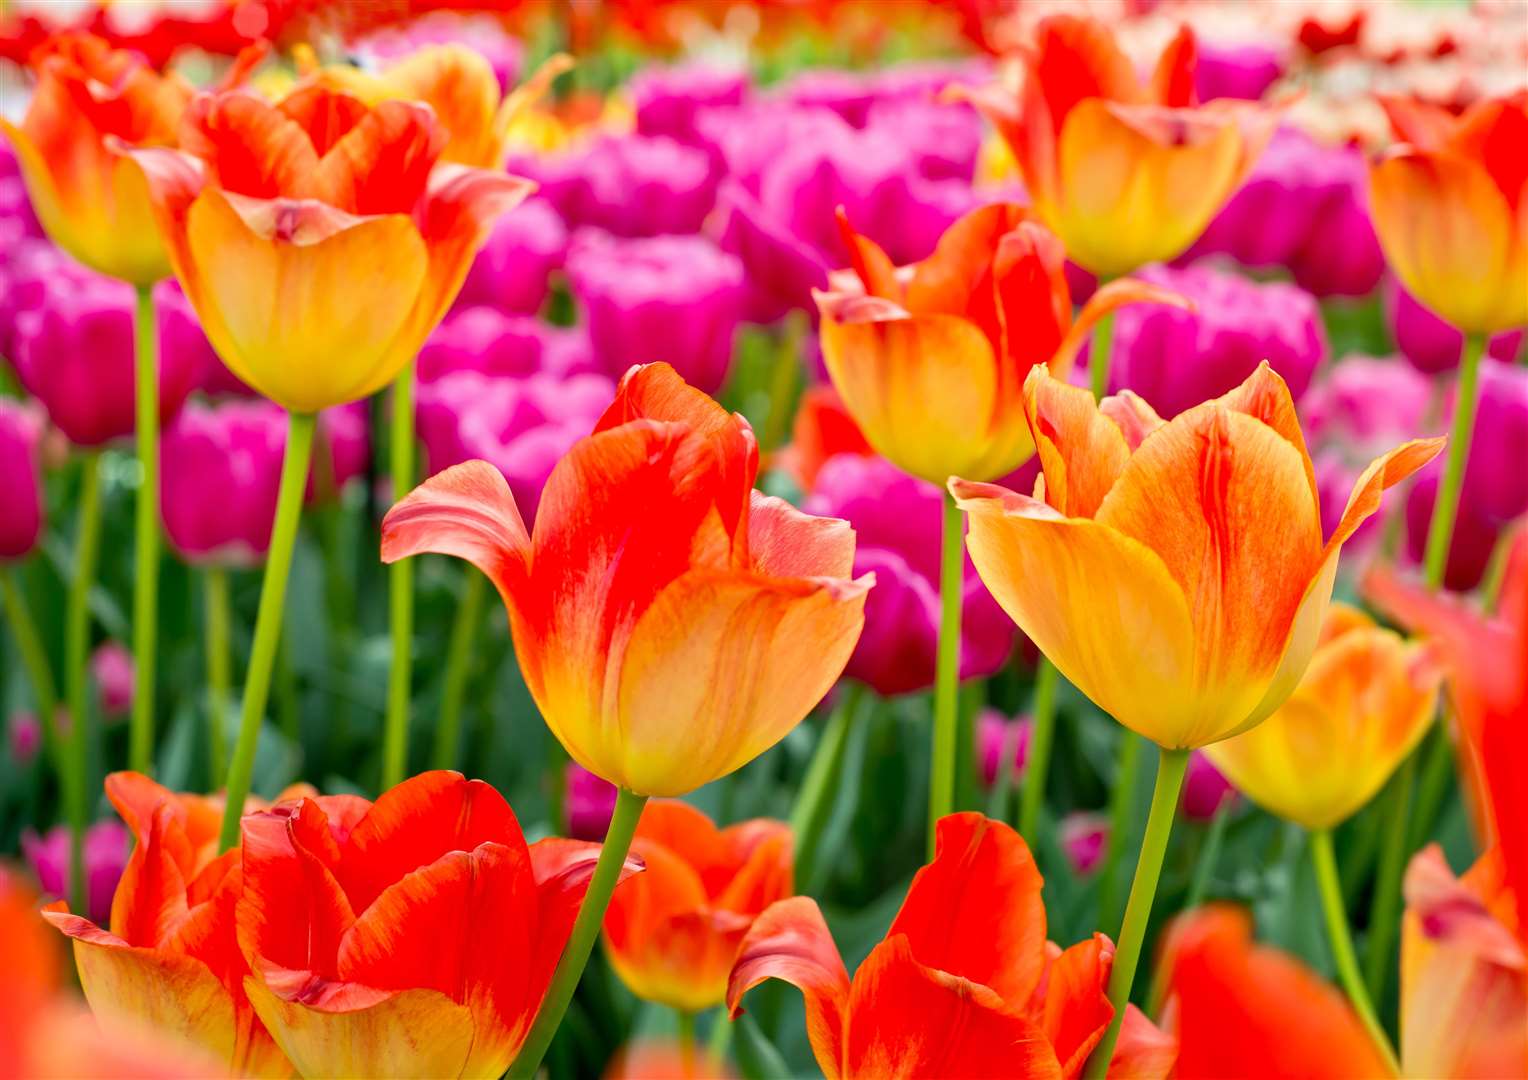 Tulips were originally cultivated in Turkey and were imported into Western Europe in the 16th century.